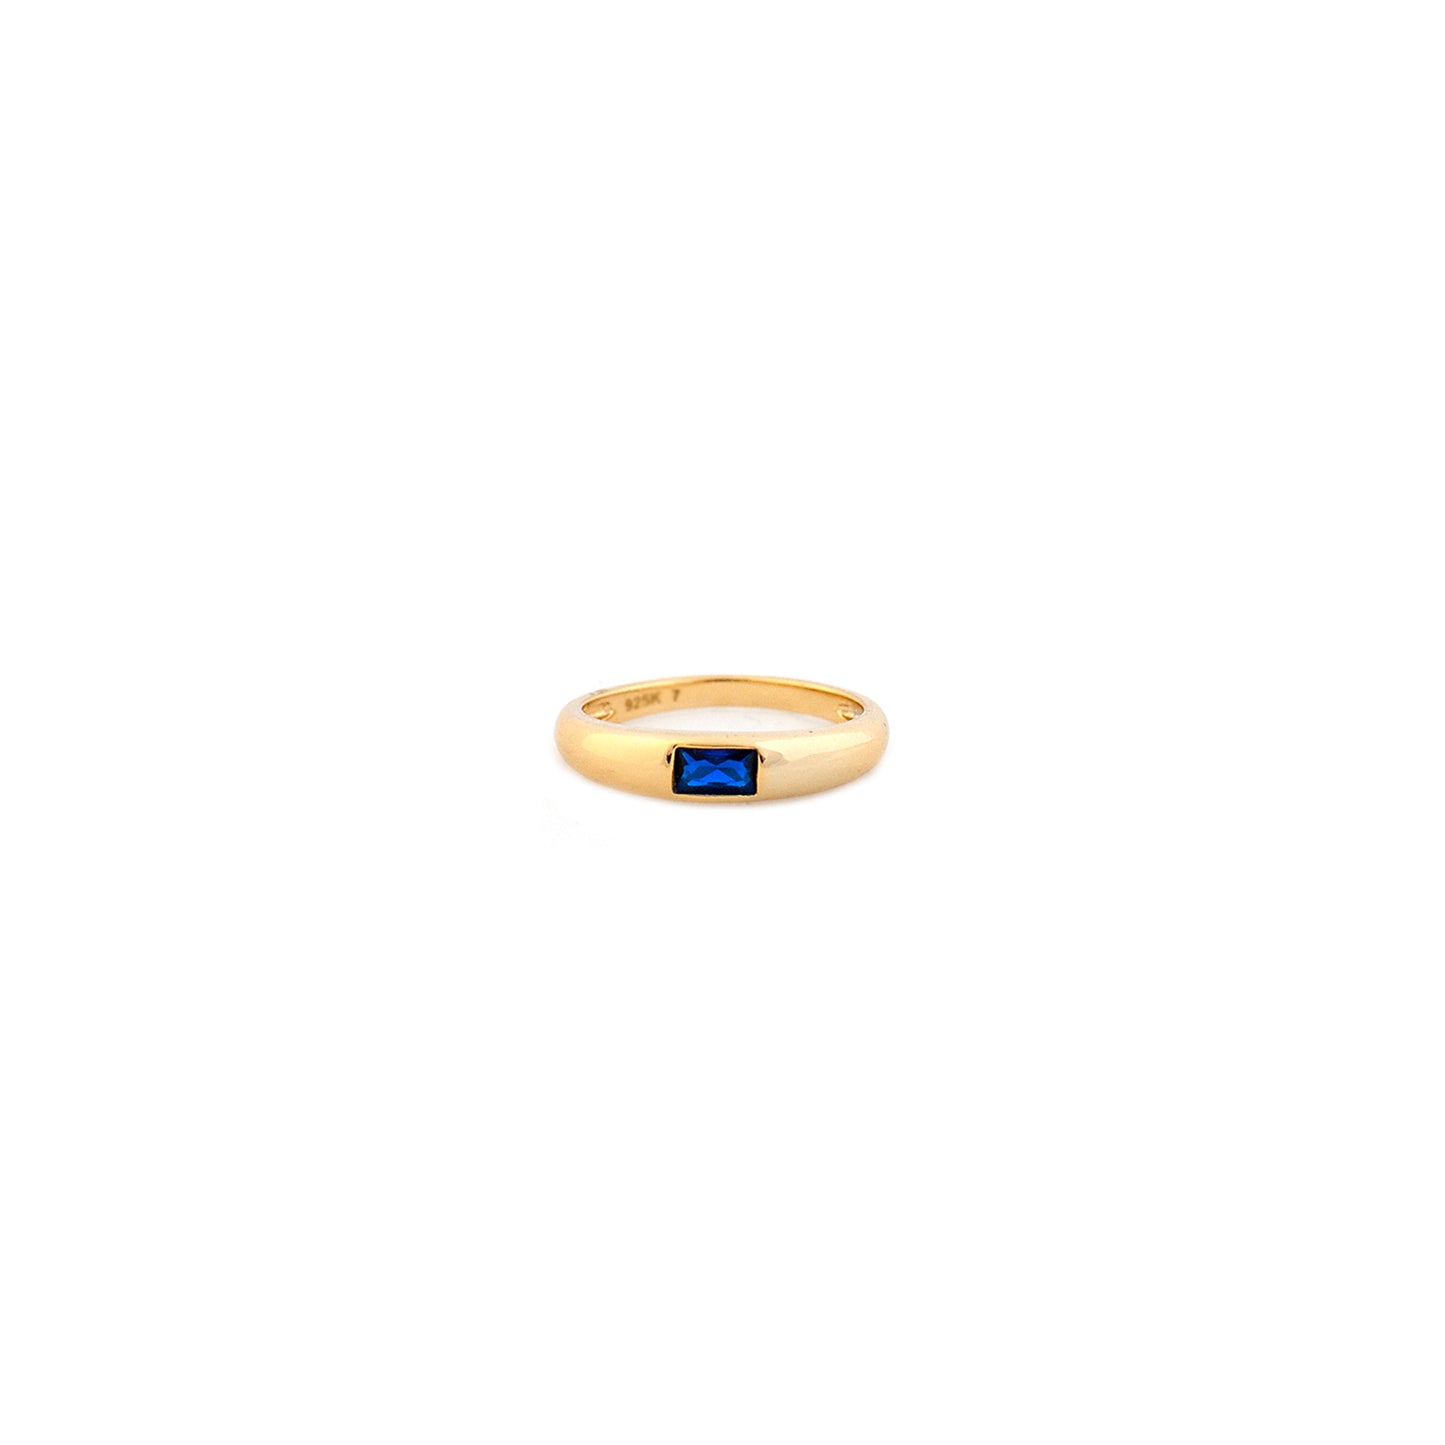 Gold Plated Narrow Dome Ring with Colored Stone Baguette